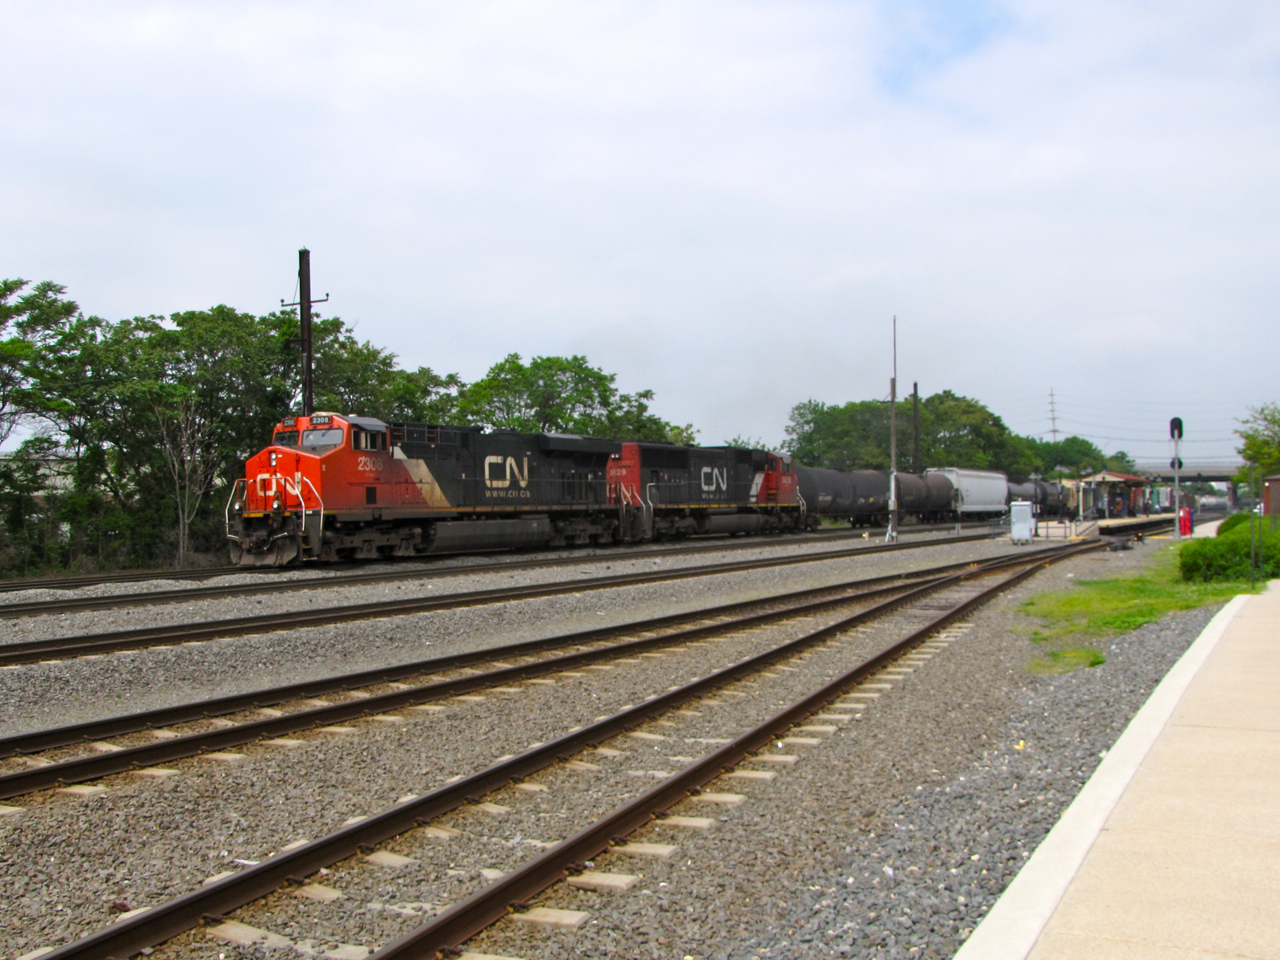 CN 2308 and 5629